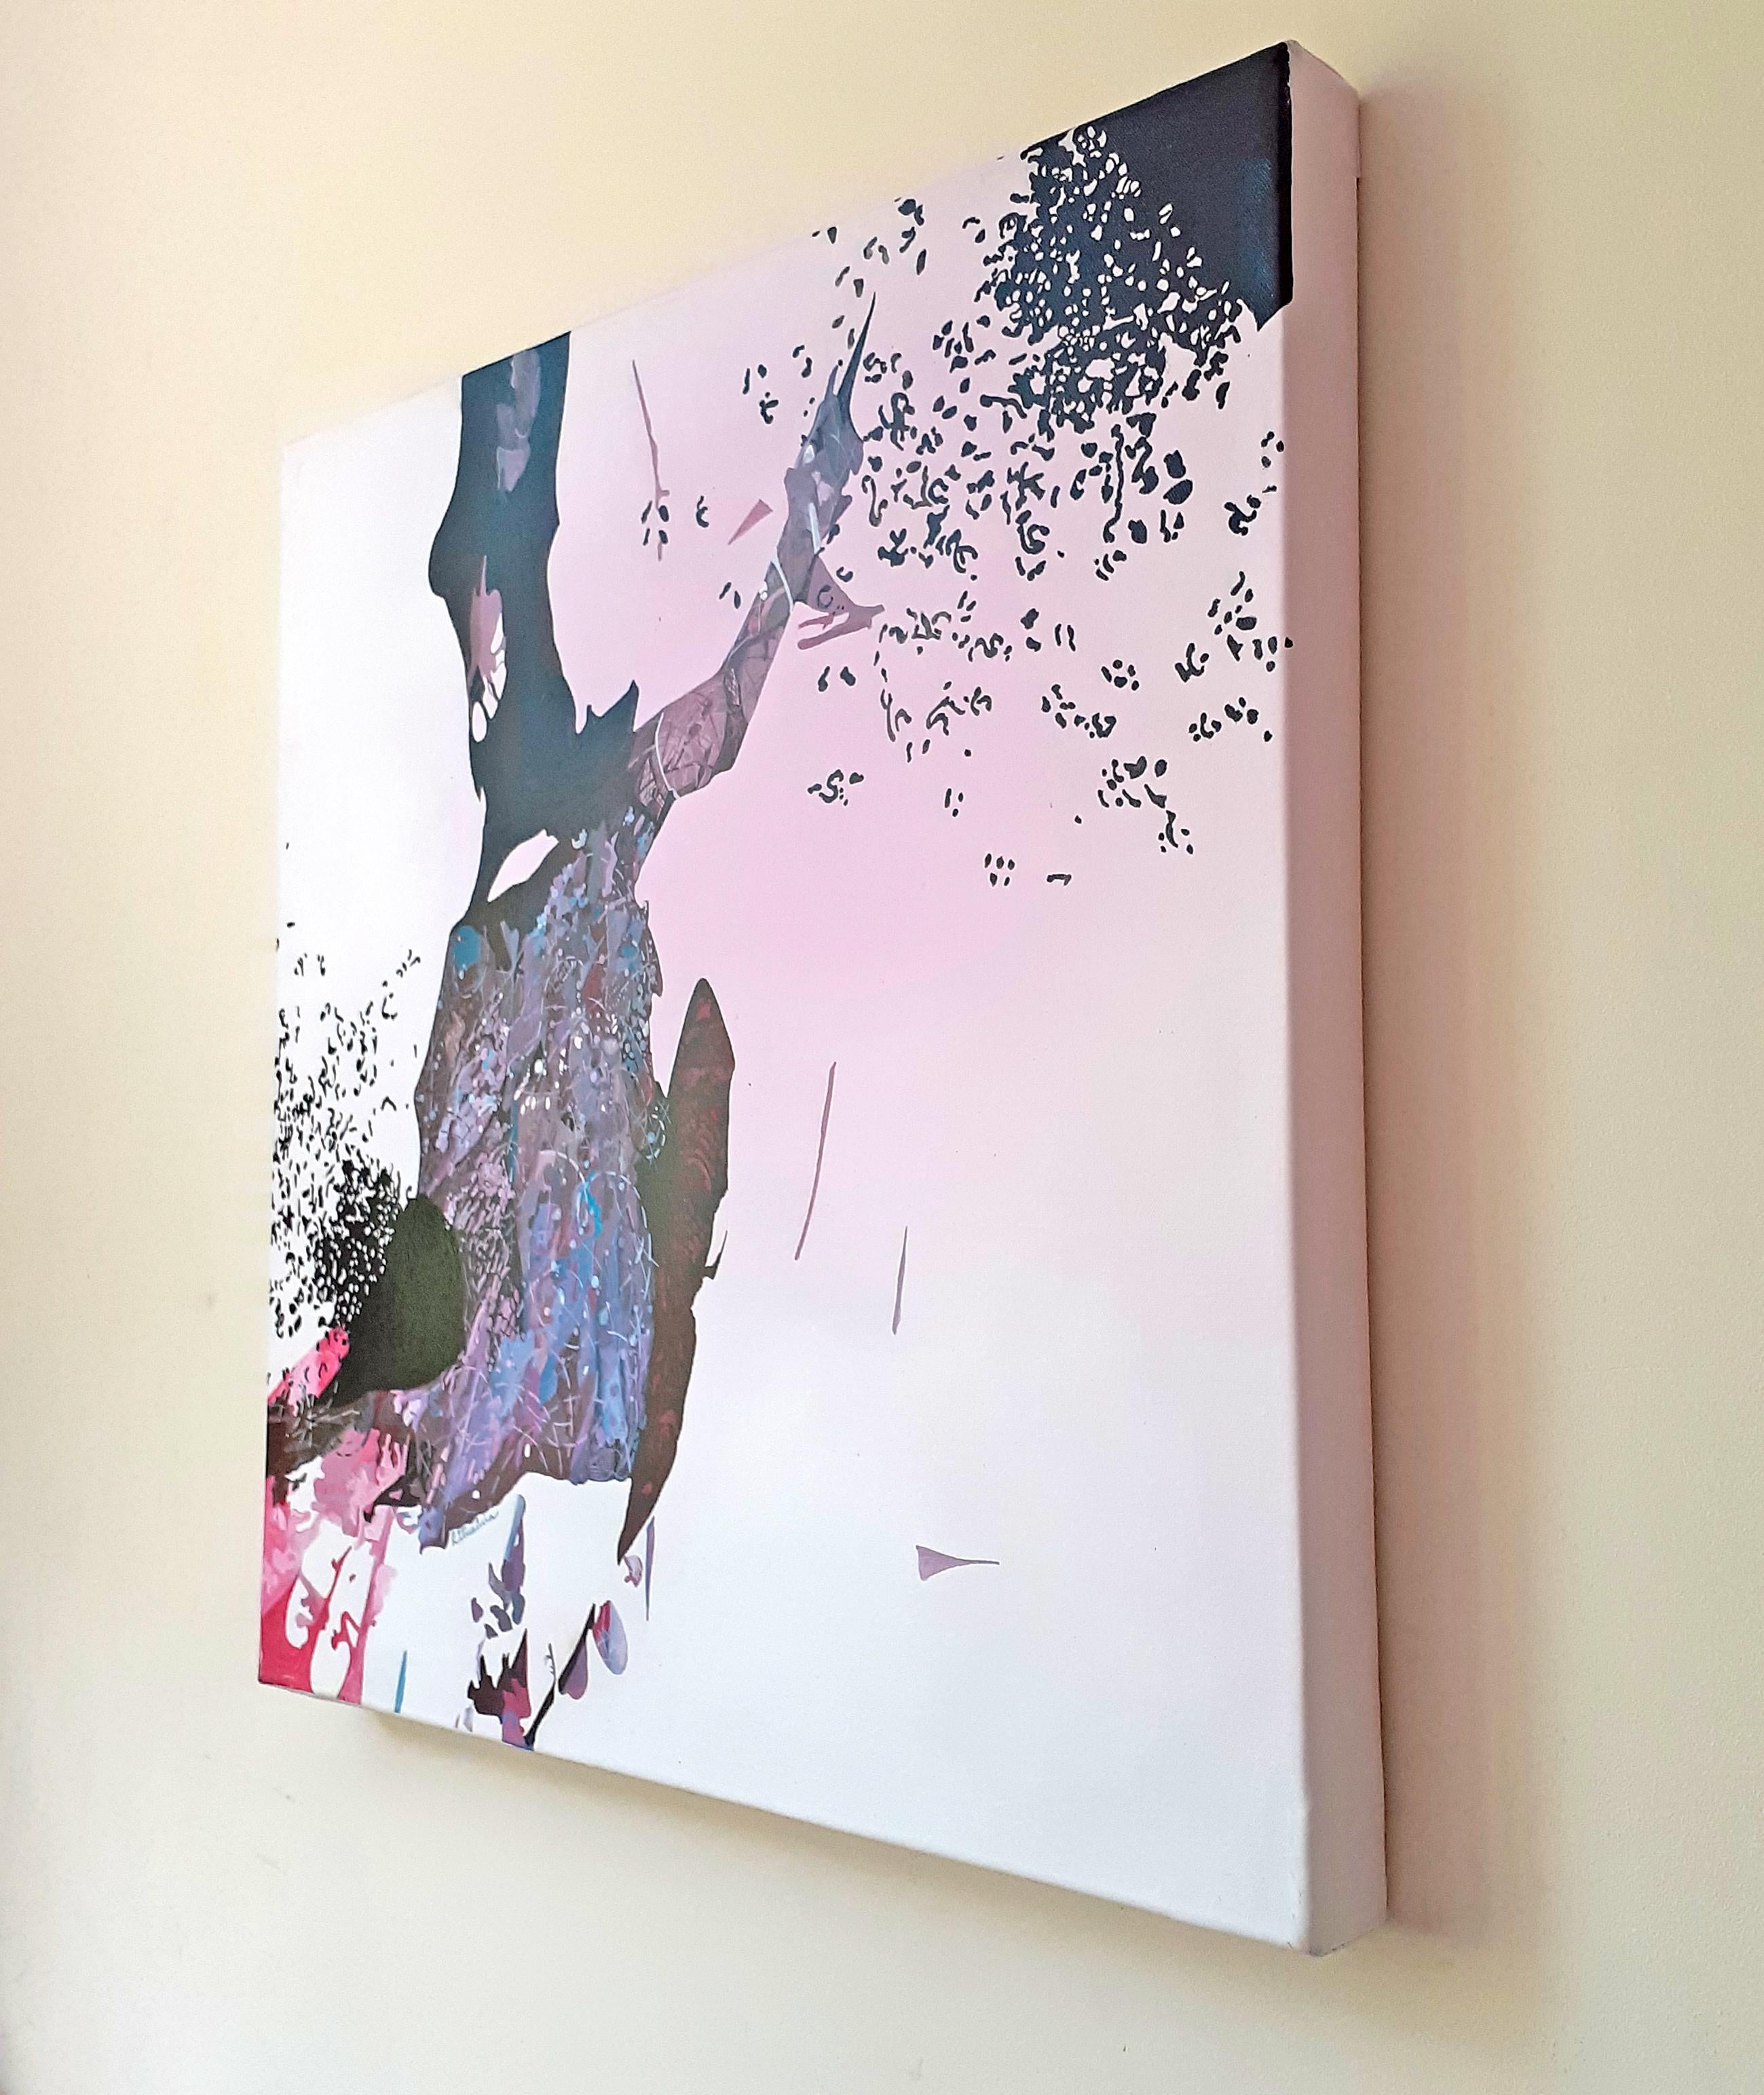 I Believe I Can Fly -Incredible 5 Panel Painting in Pink + Grey by Indian Artist For Sale 9